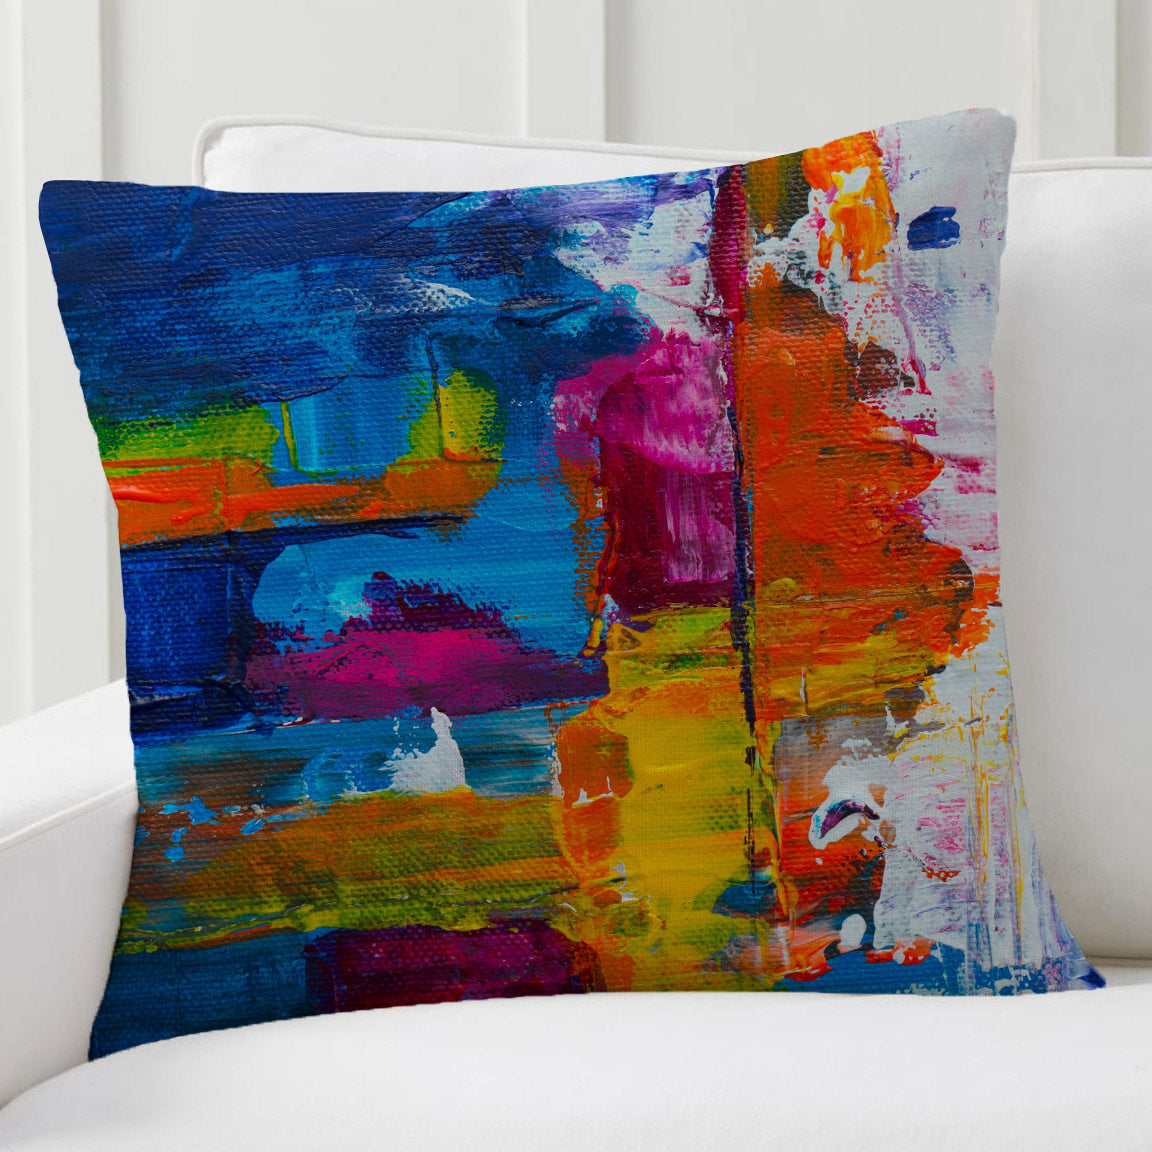 Picasso's Vision Cushion Cover Trendy Home